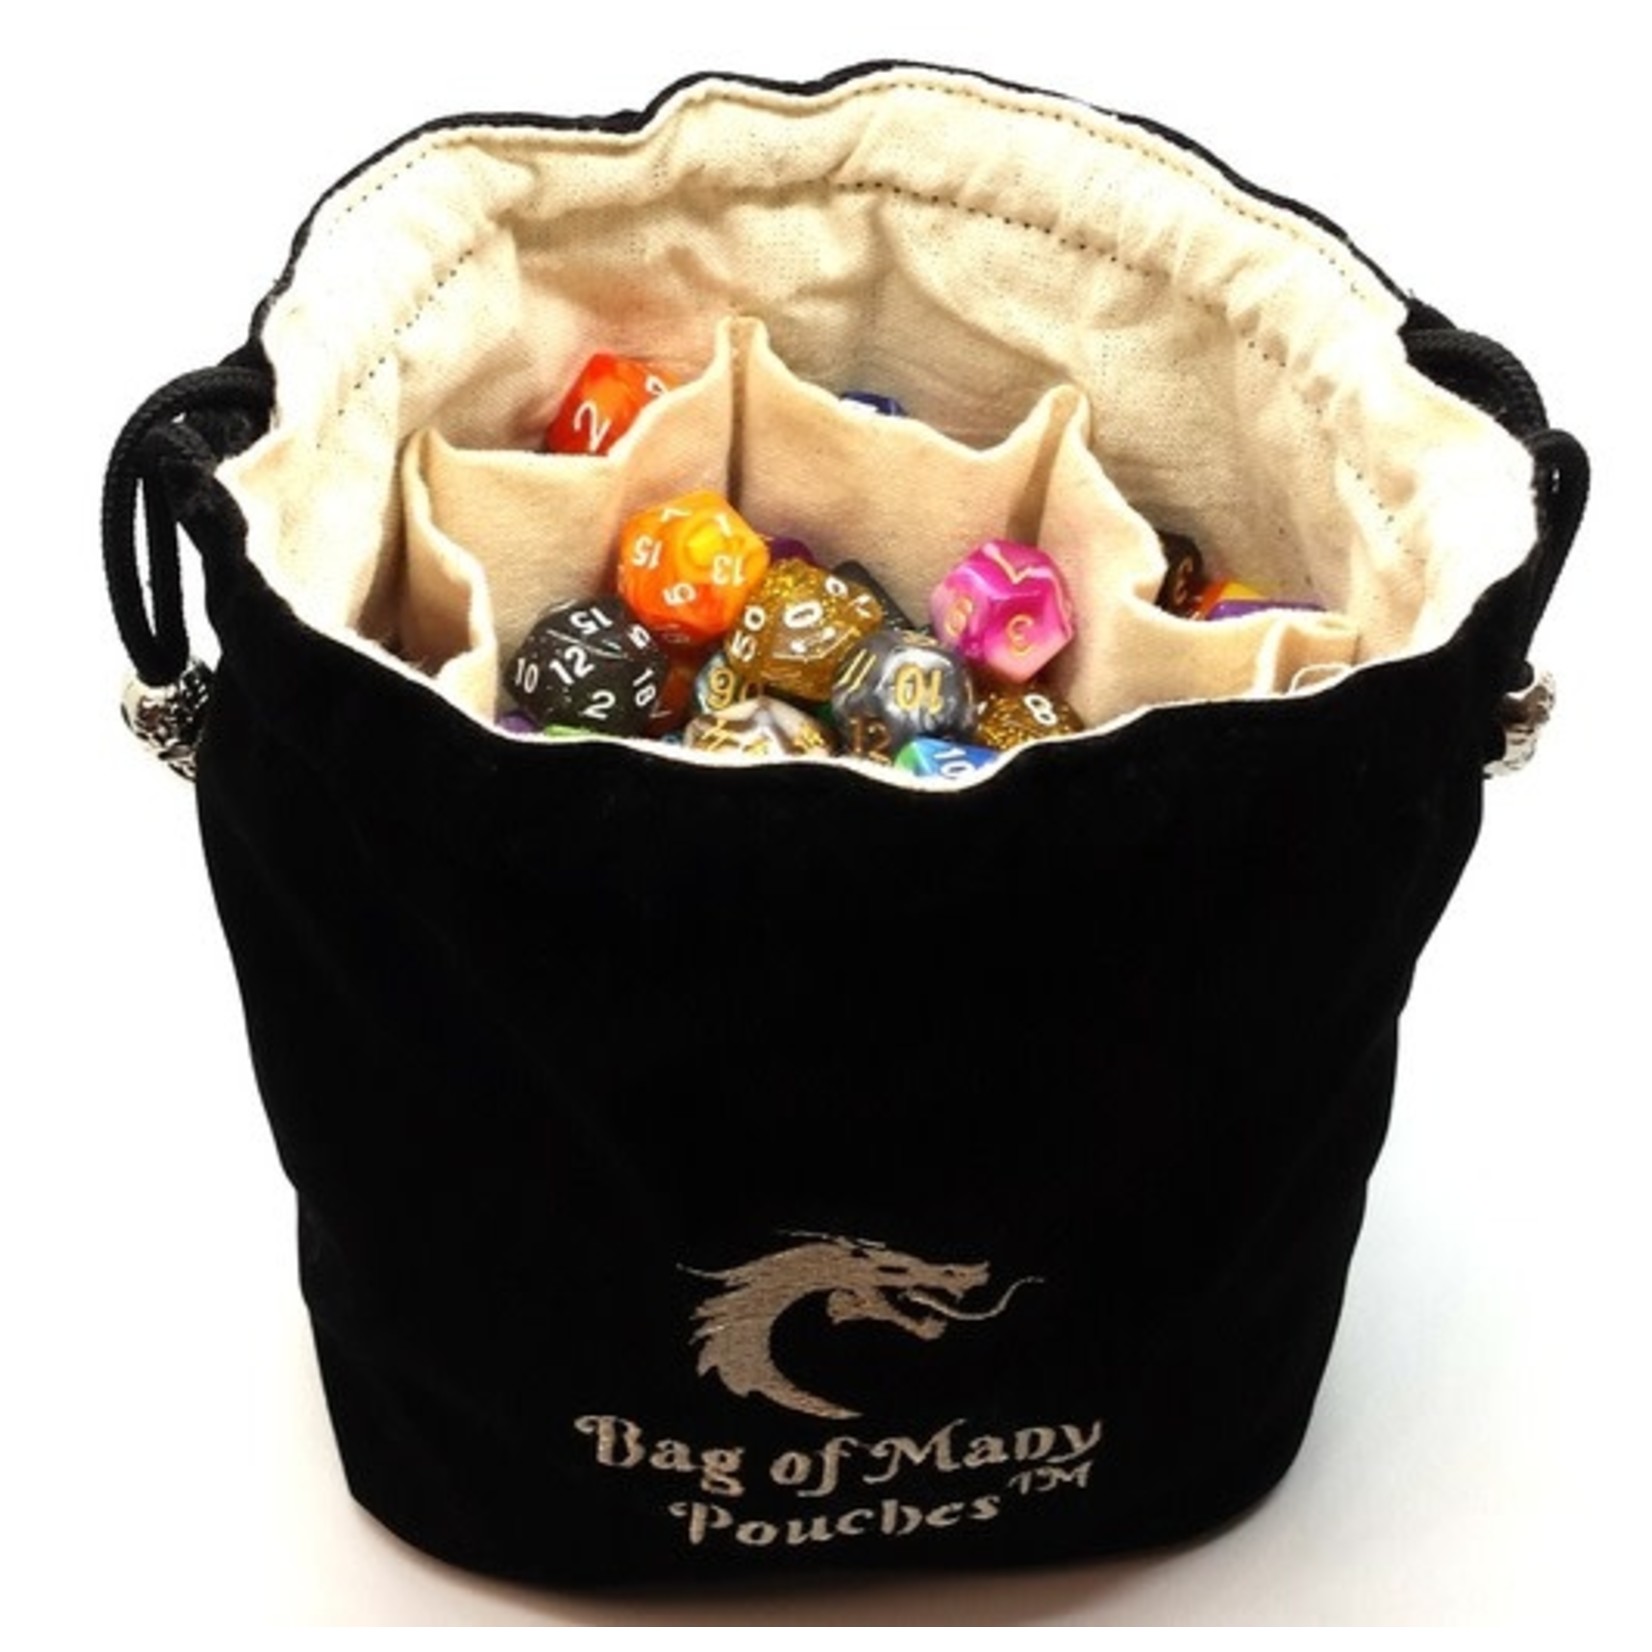 Old School Bag of Many Pouches RPG DnD Dice Bag: Black